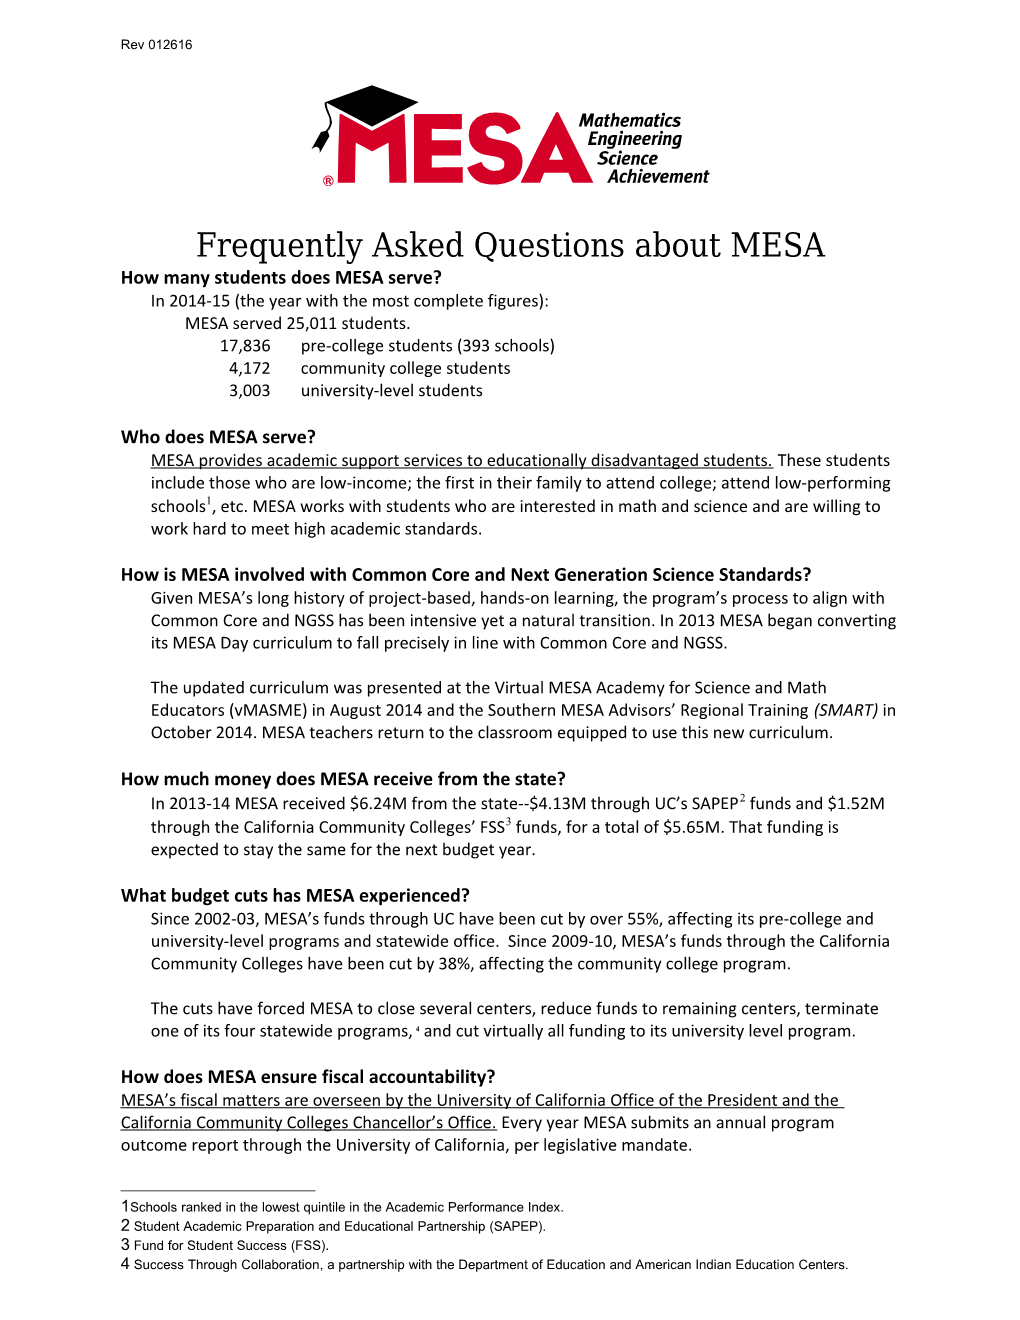 Frequently Asked Questions About MESA